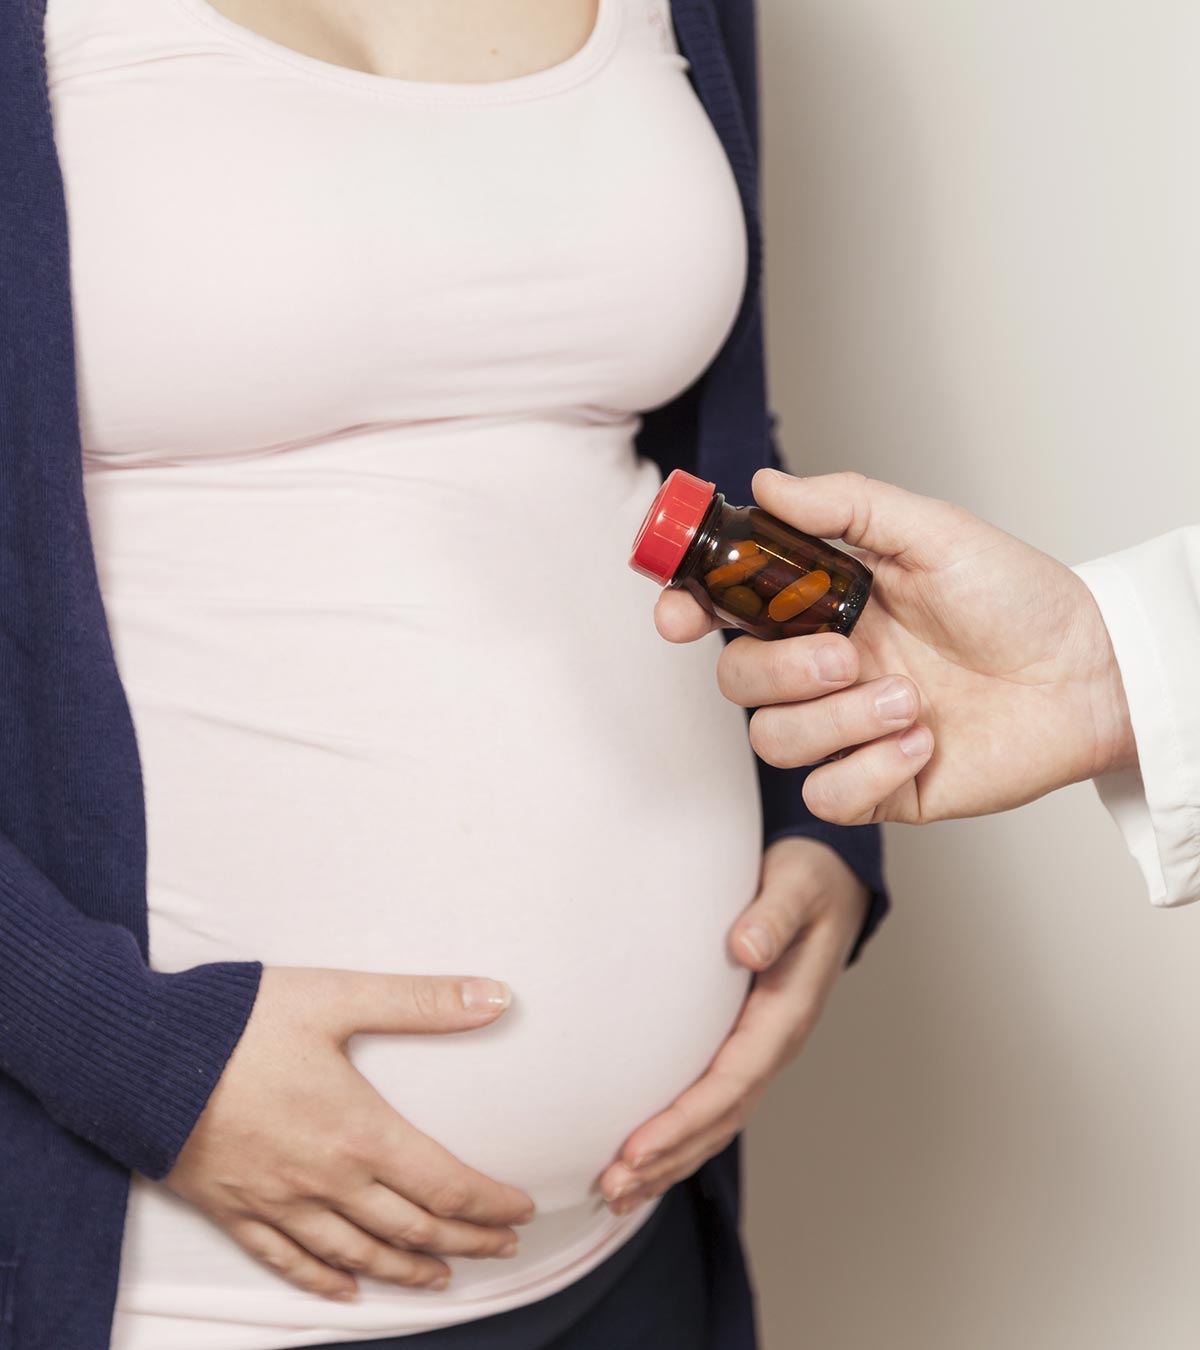 Can You Take Acyclovir For Herpes Infection During Pregnancy?